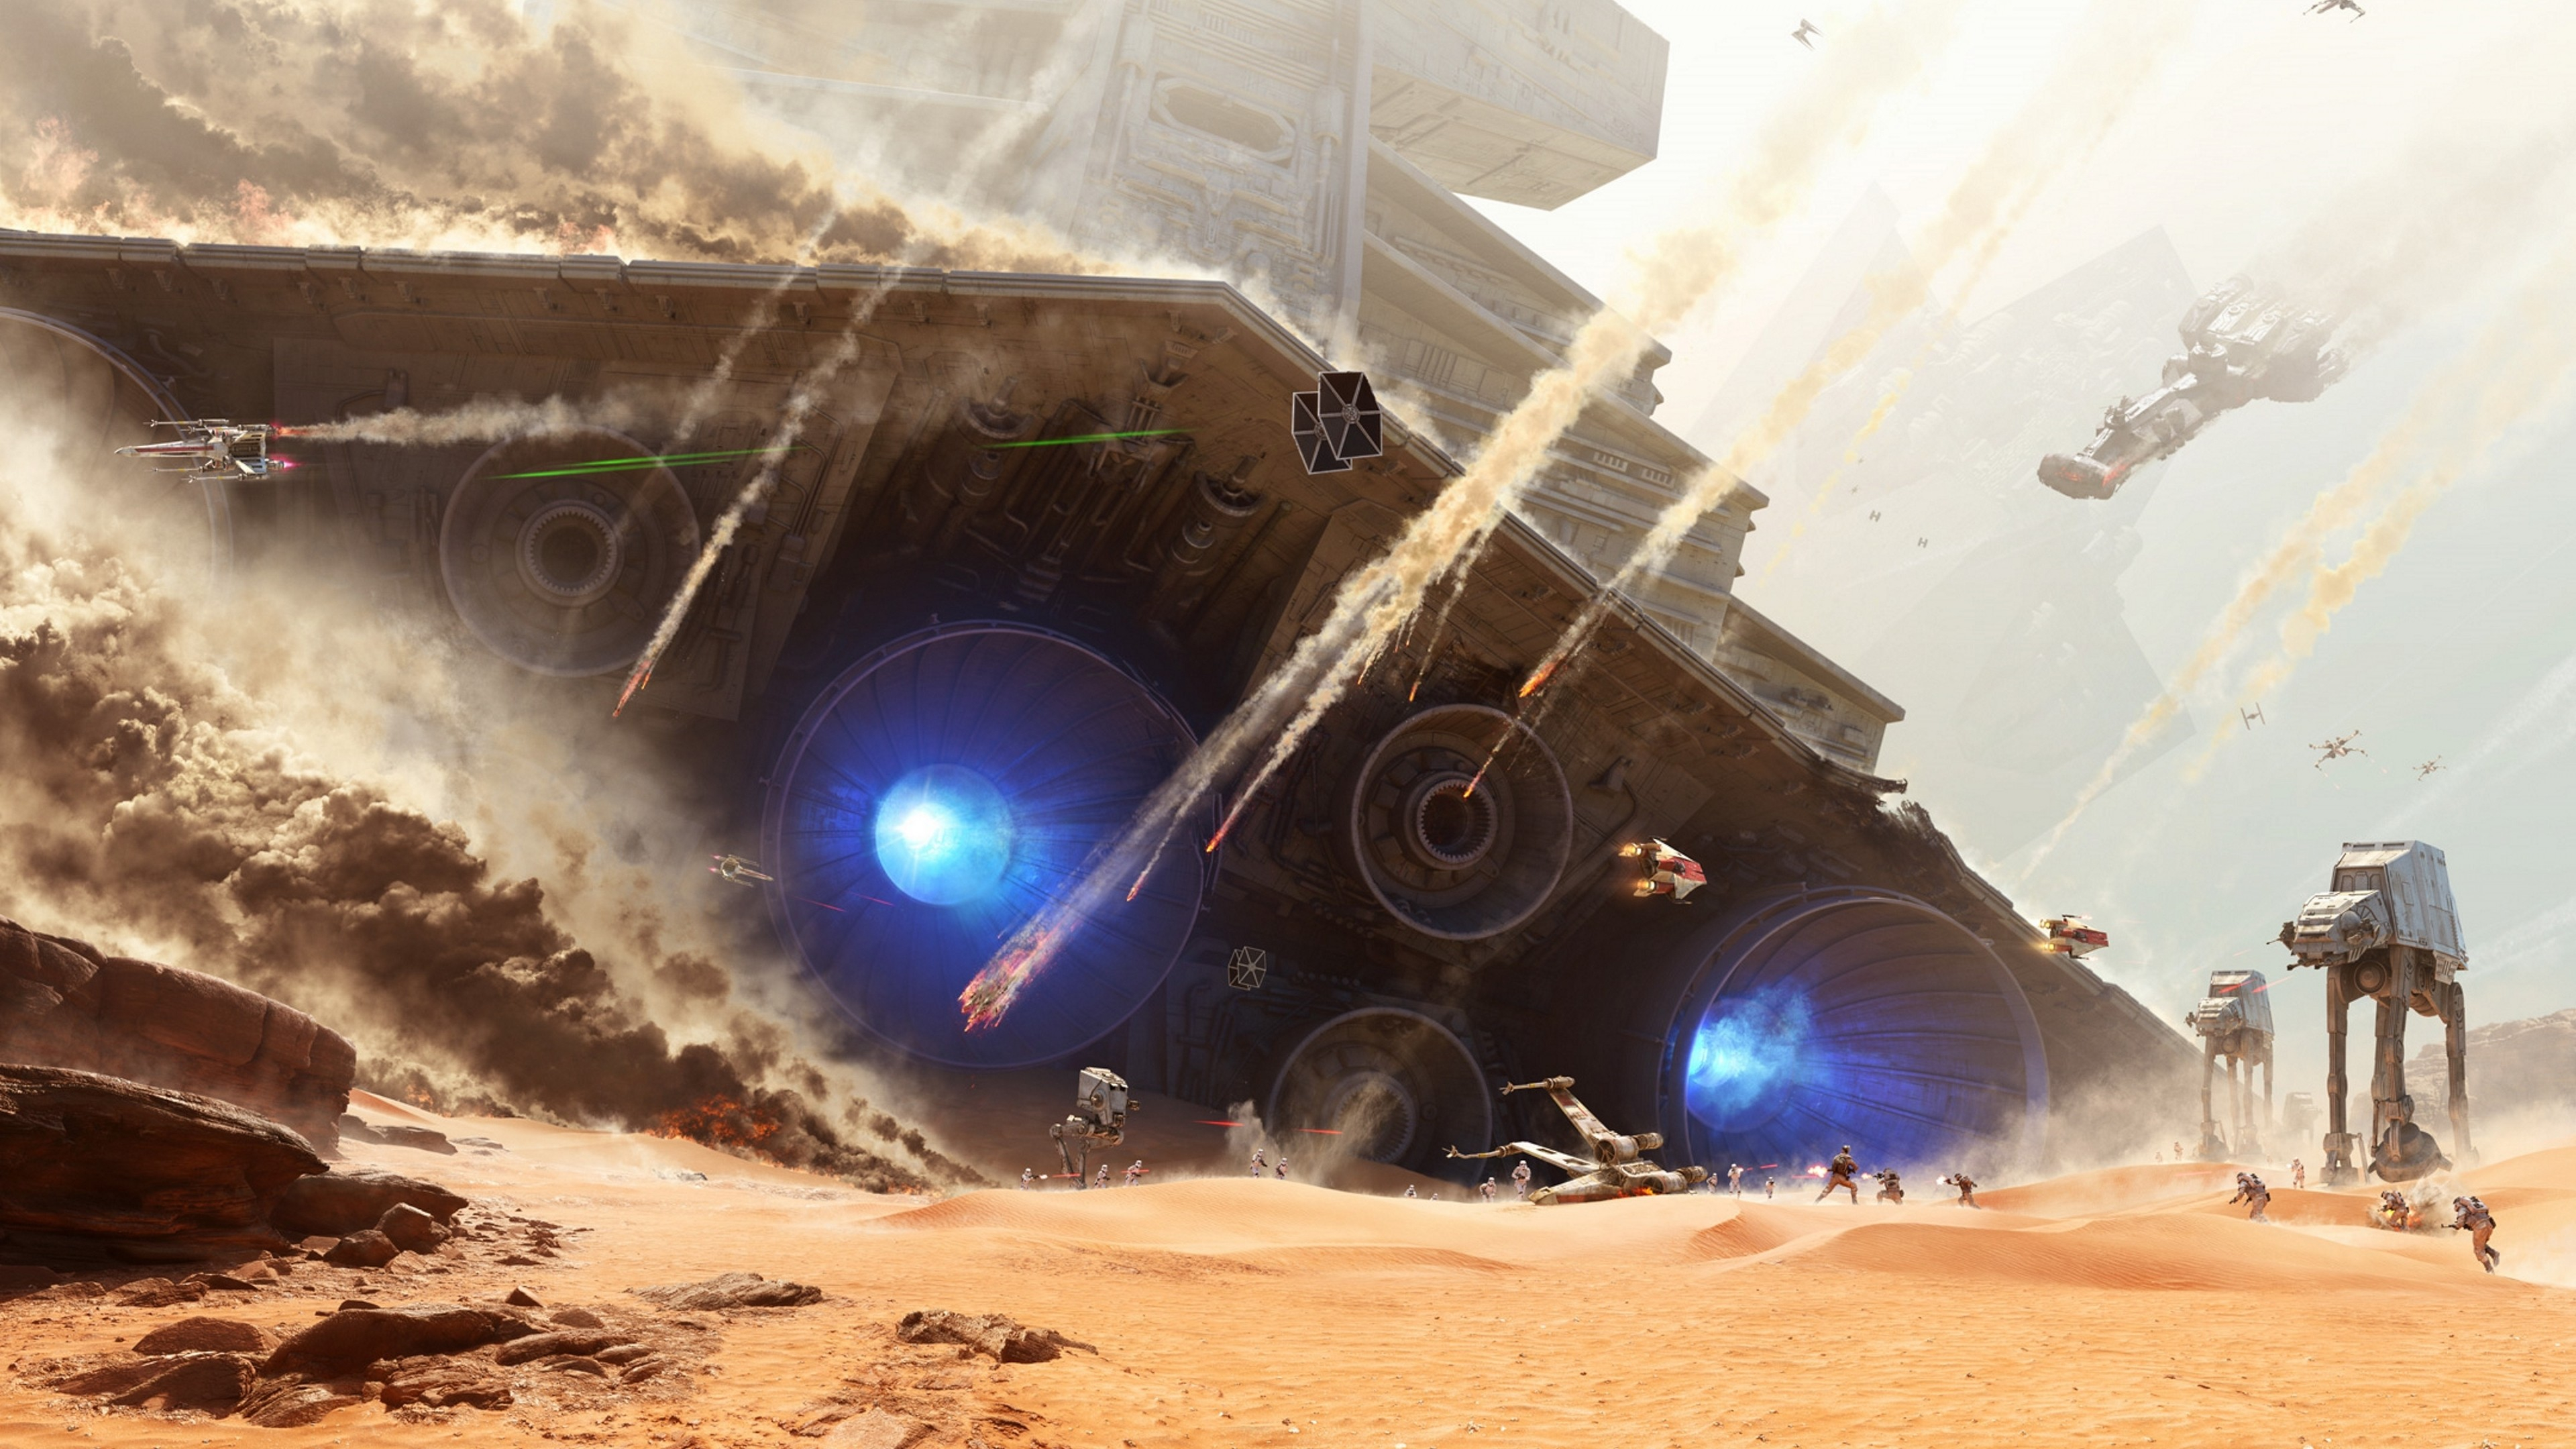 3840x2160 Wallpaper : Star Wars, video games, space, vehicle, battle, soldier, desert, TIE Fighter, Star Destroyer, X wing, EA DICE, AT ST, AT AT, Star Wars Battlefront, screenshot, atmosphere of earth